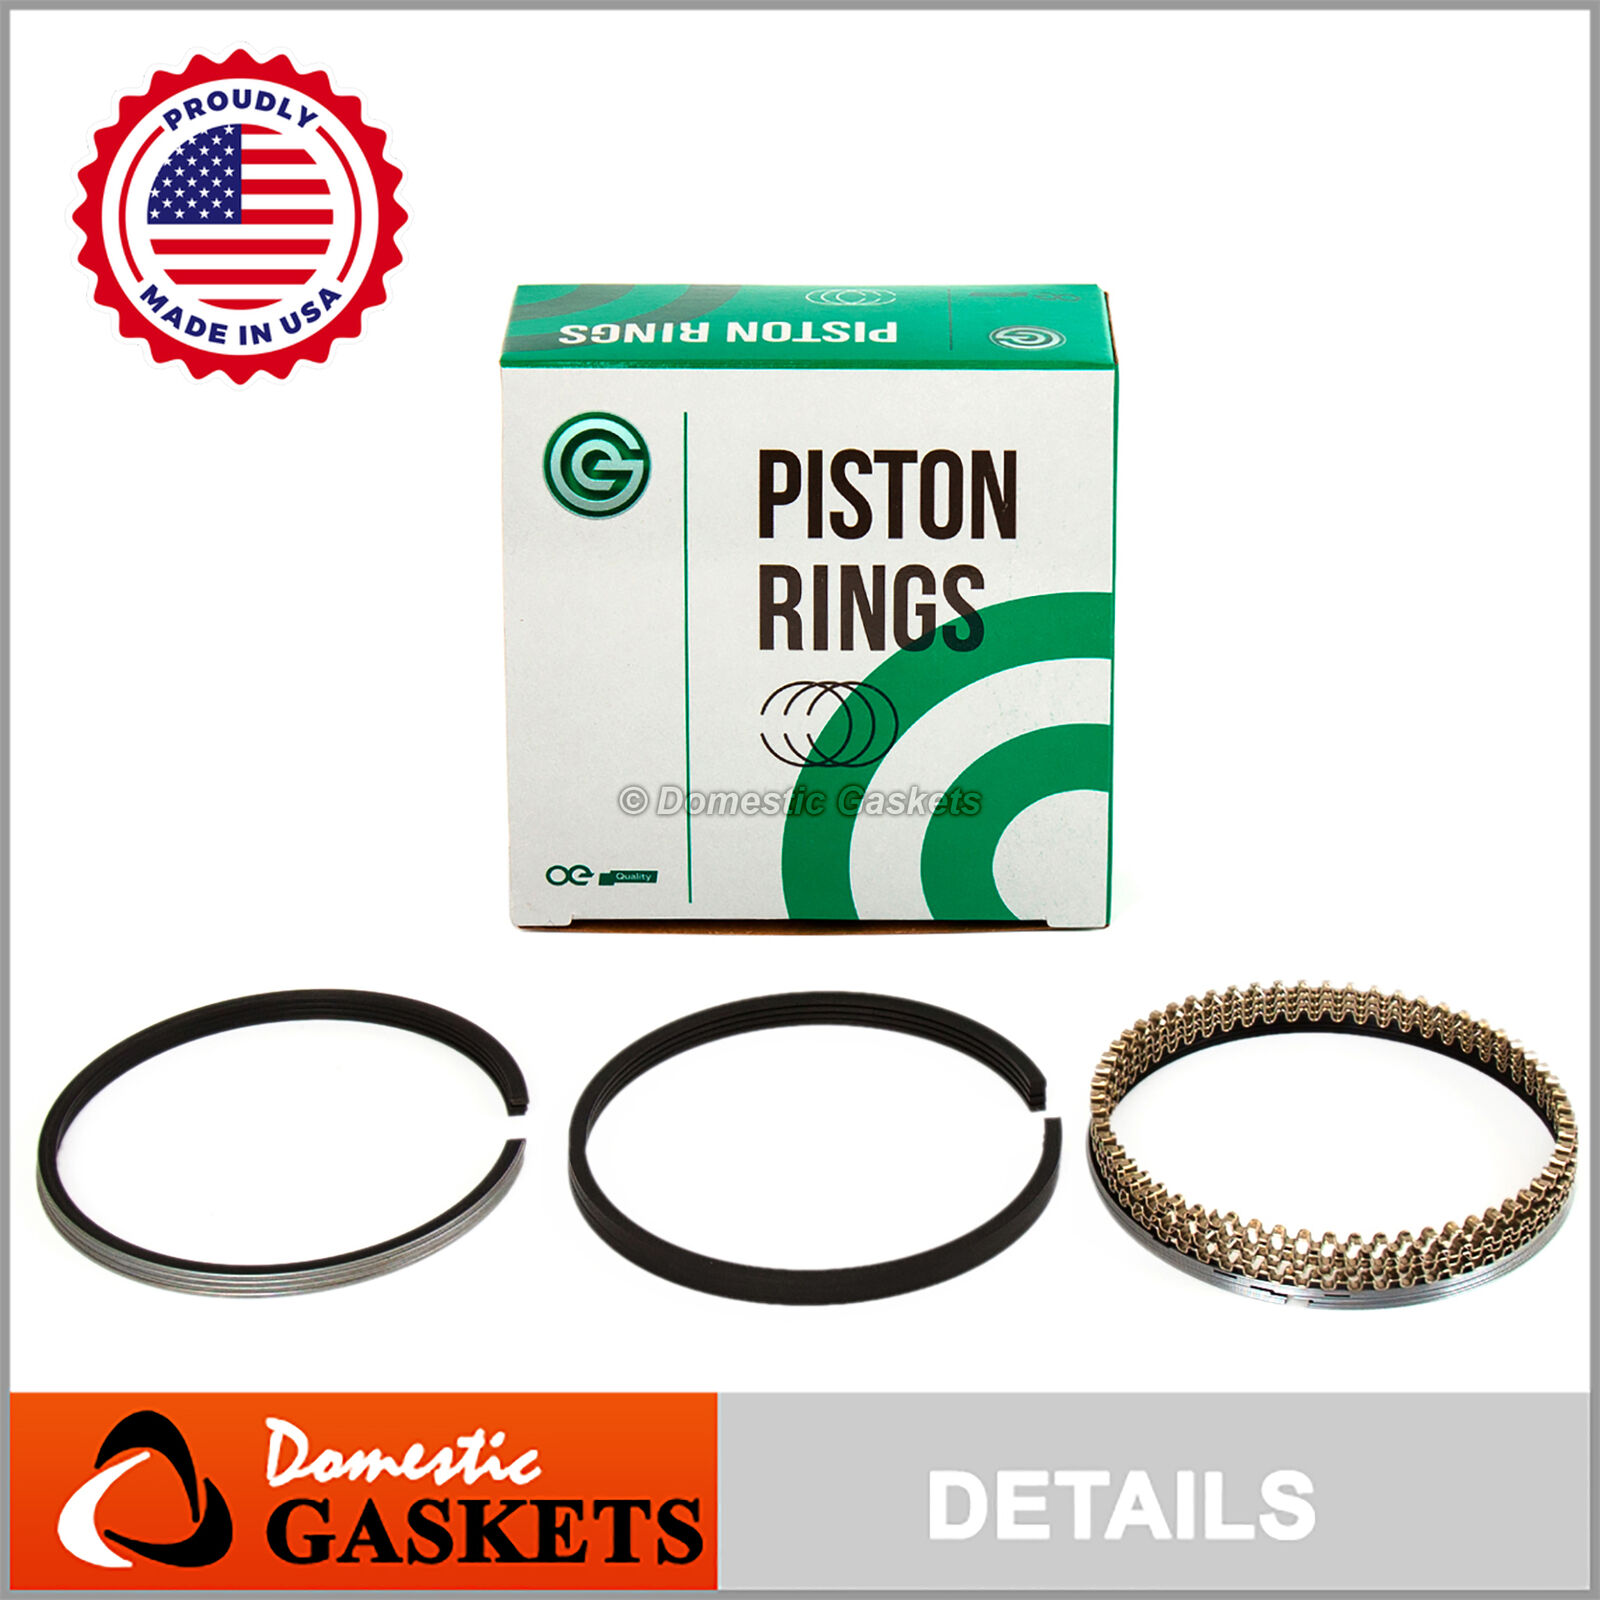 Made in USA Piston Rings Fit 92-08 Chevrolet Aveo Daewoo Lanos 1.6L DOHC